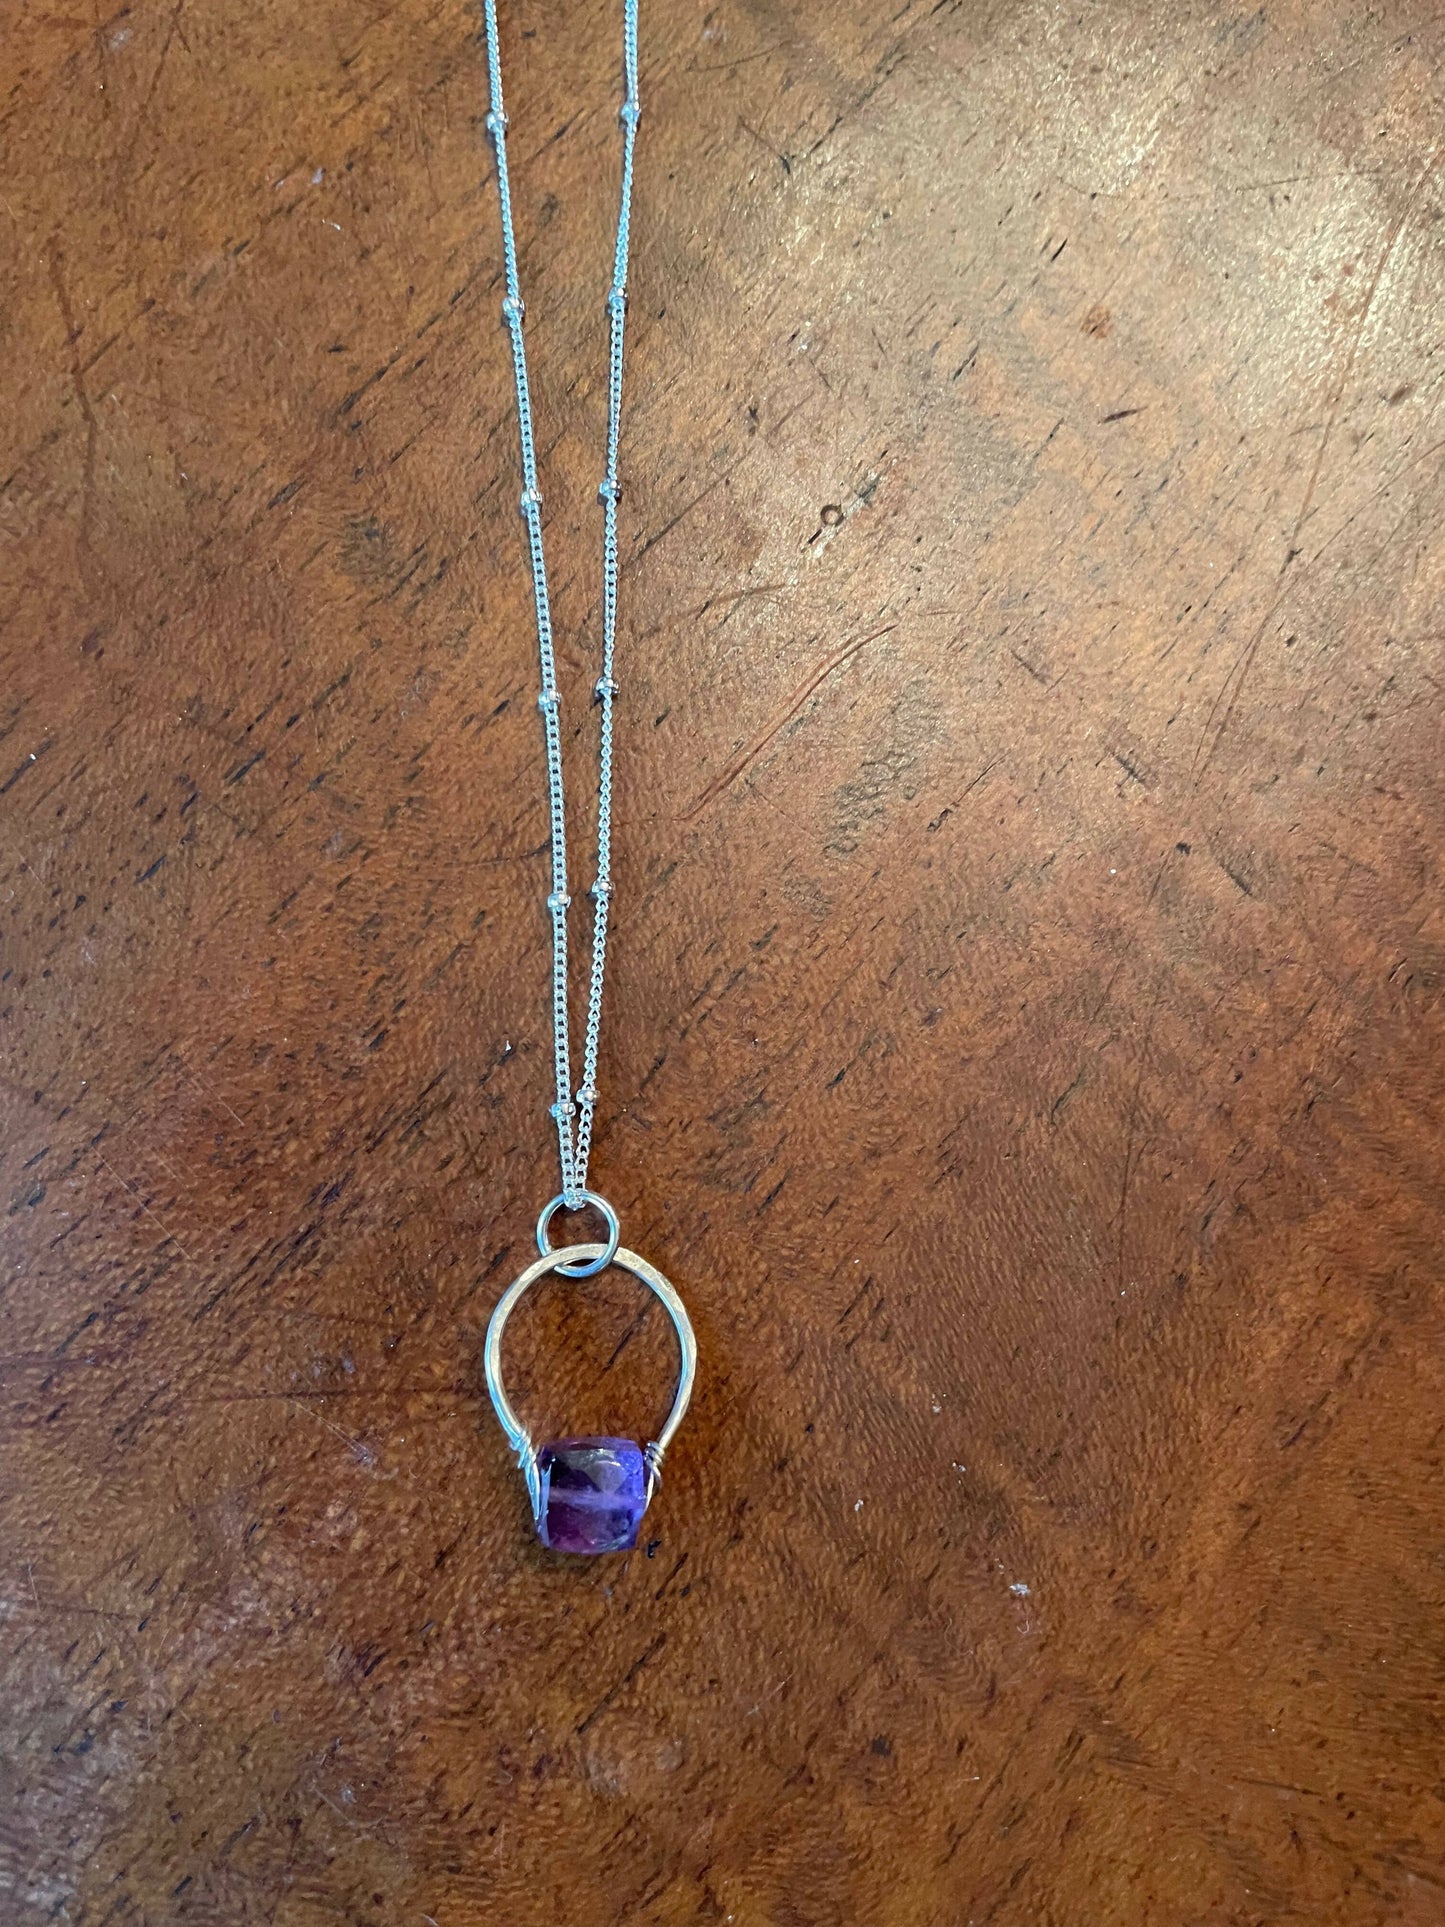 "Get lucky" Hand forged sterling silver pendant with gemstone on sterling silver chain. Assorted gemstones.